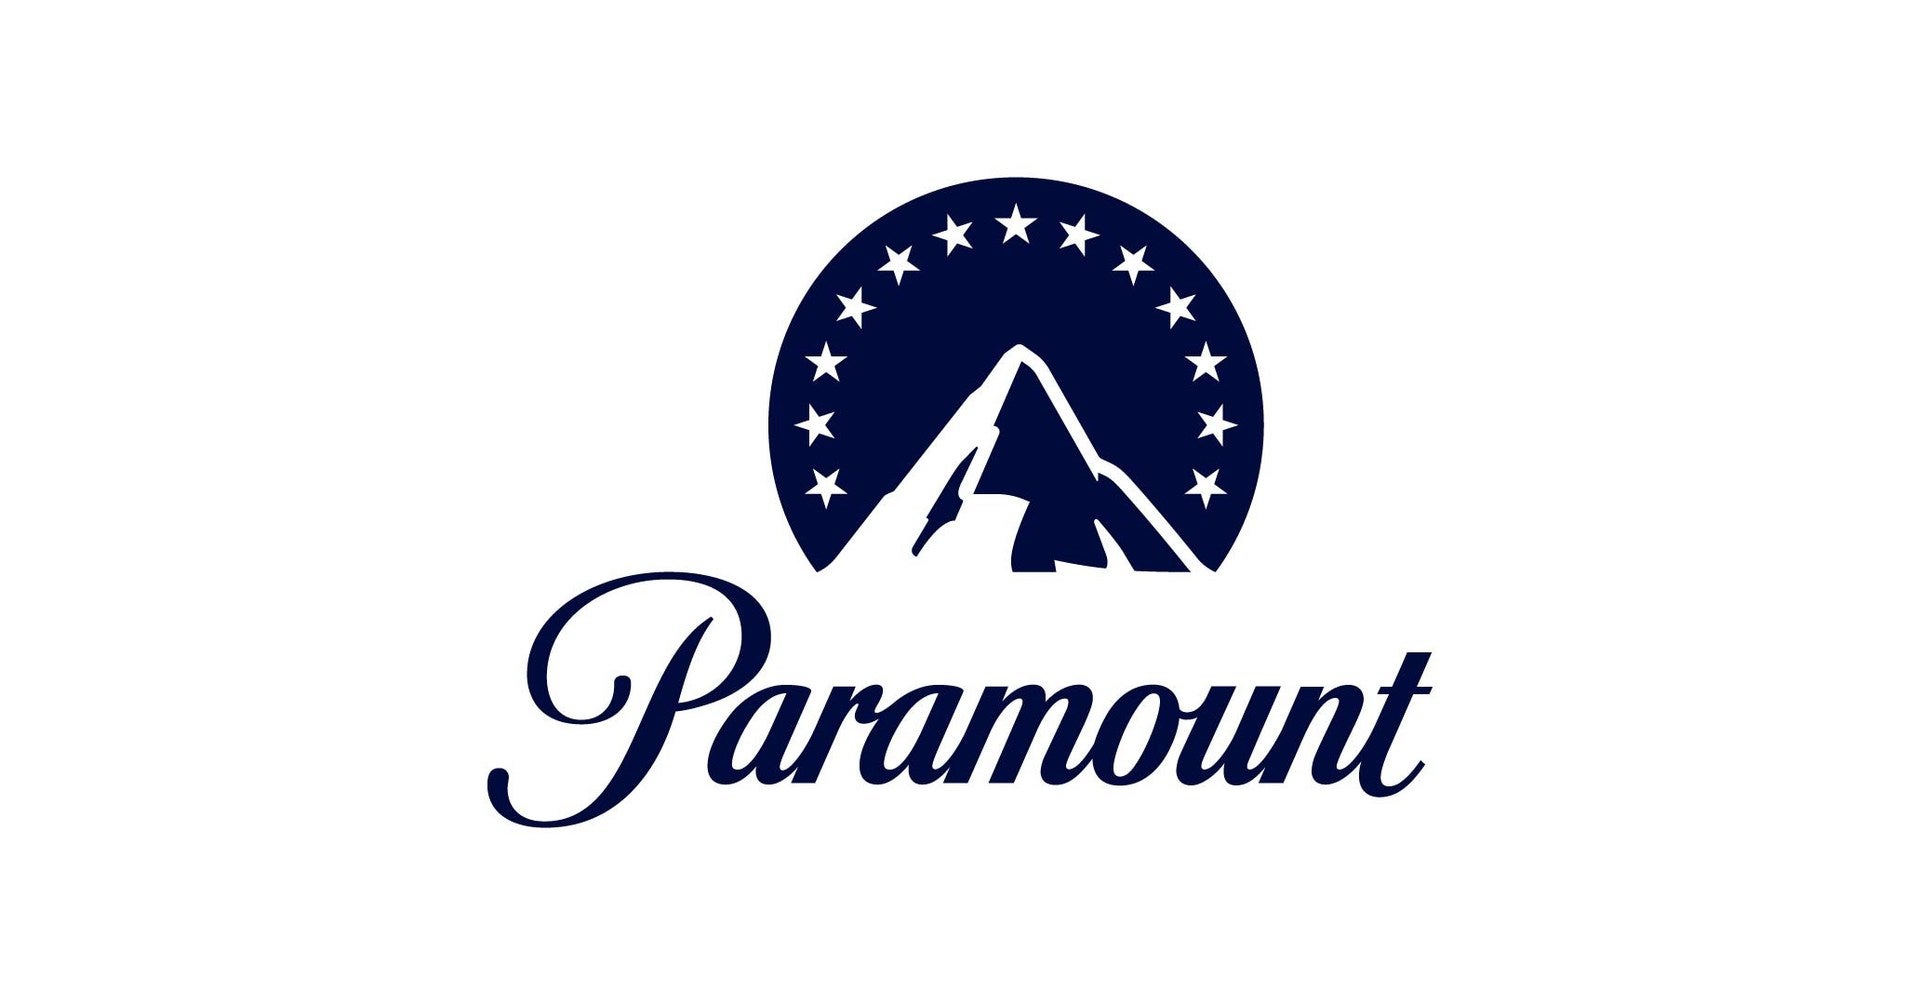 Paramount Global is once again the subject of M&A talks, this time with former Paramount Pictures head Barry Diller.